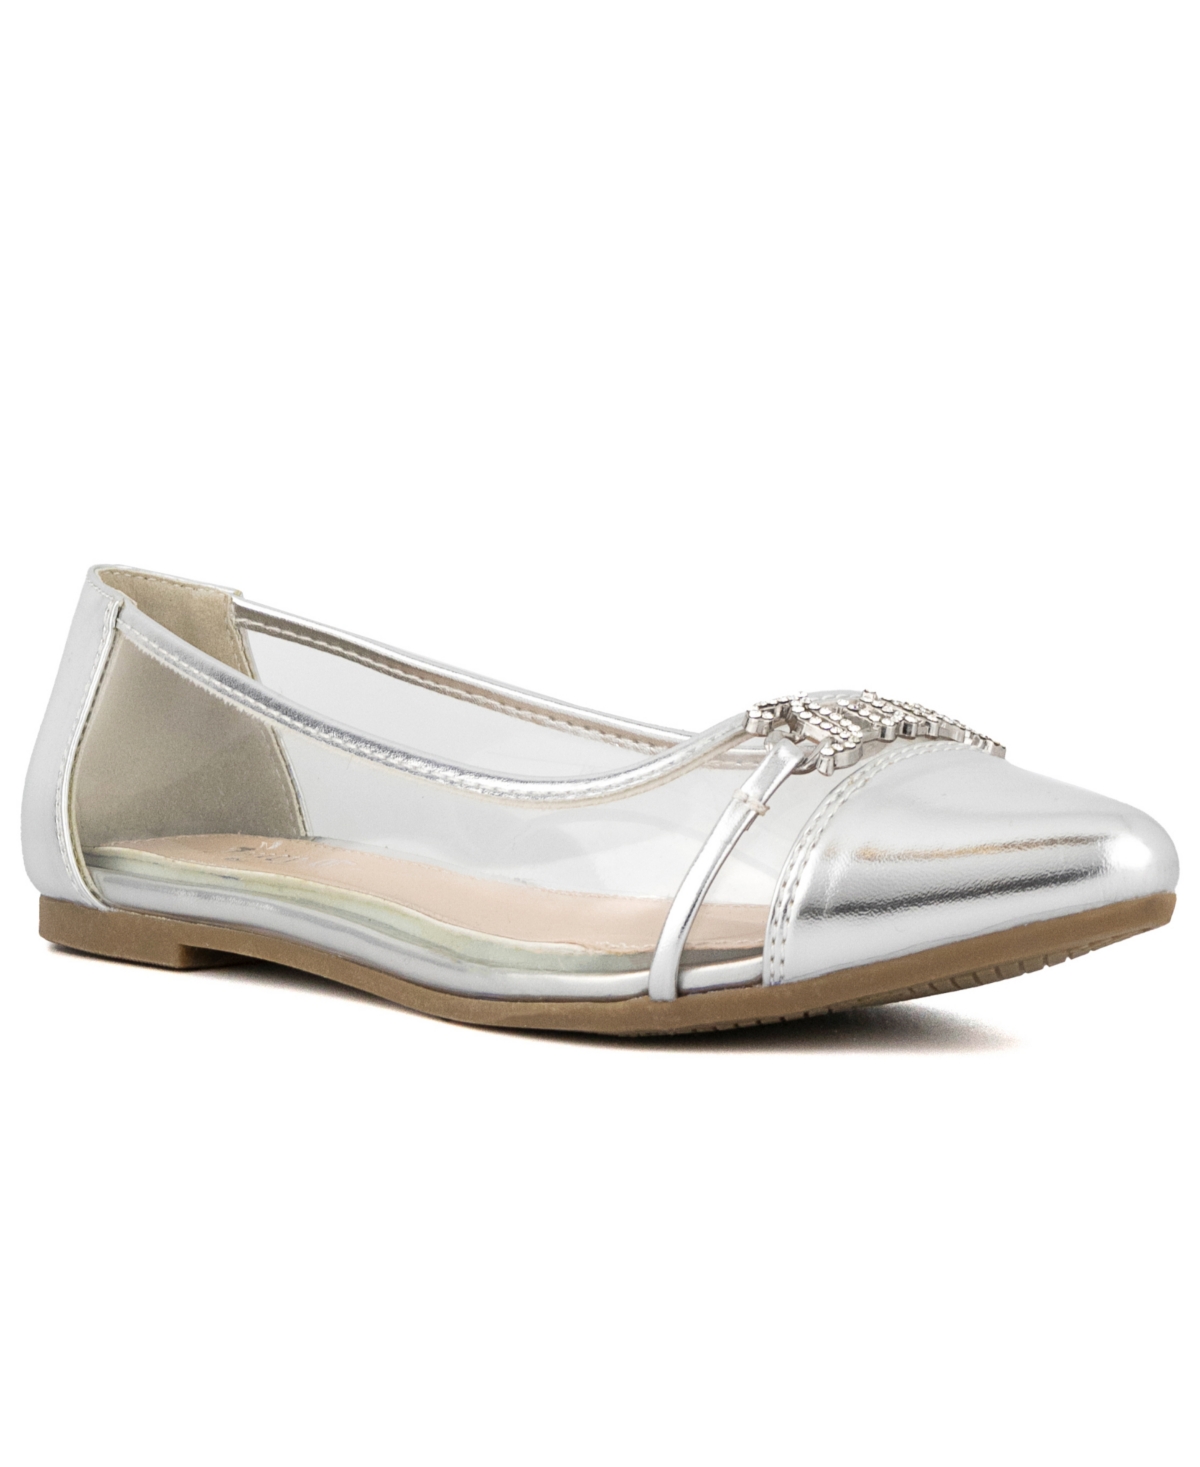 Women's Pixie Slip-on Lucite Flats - Clear